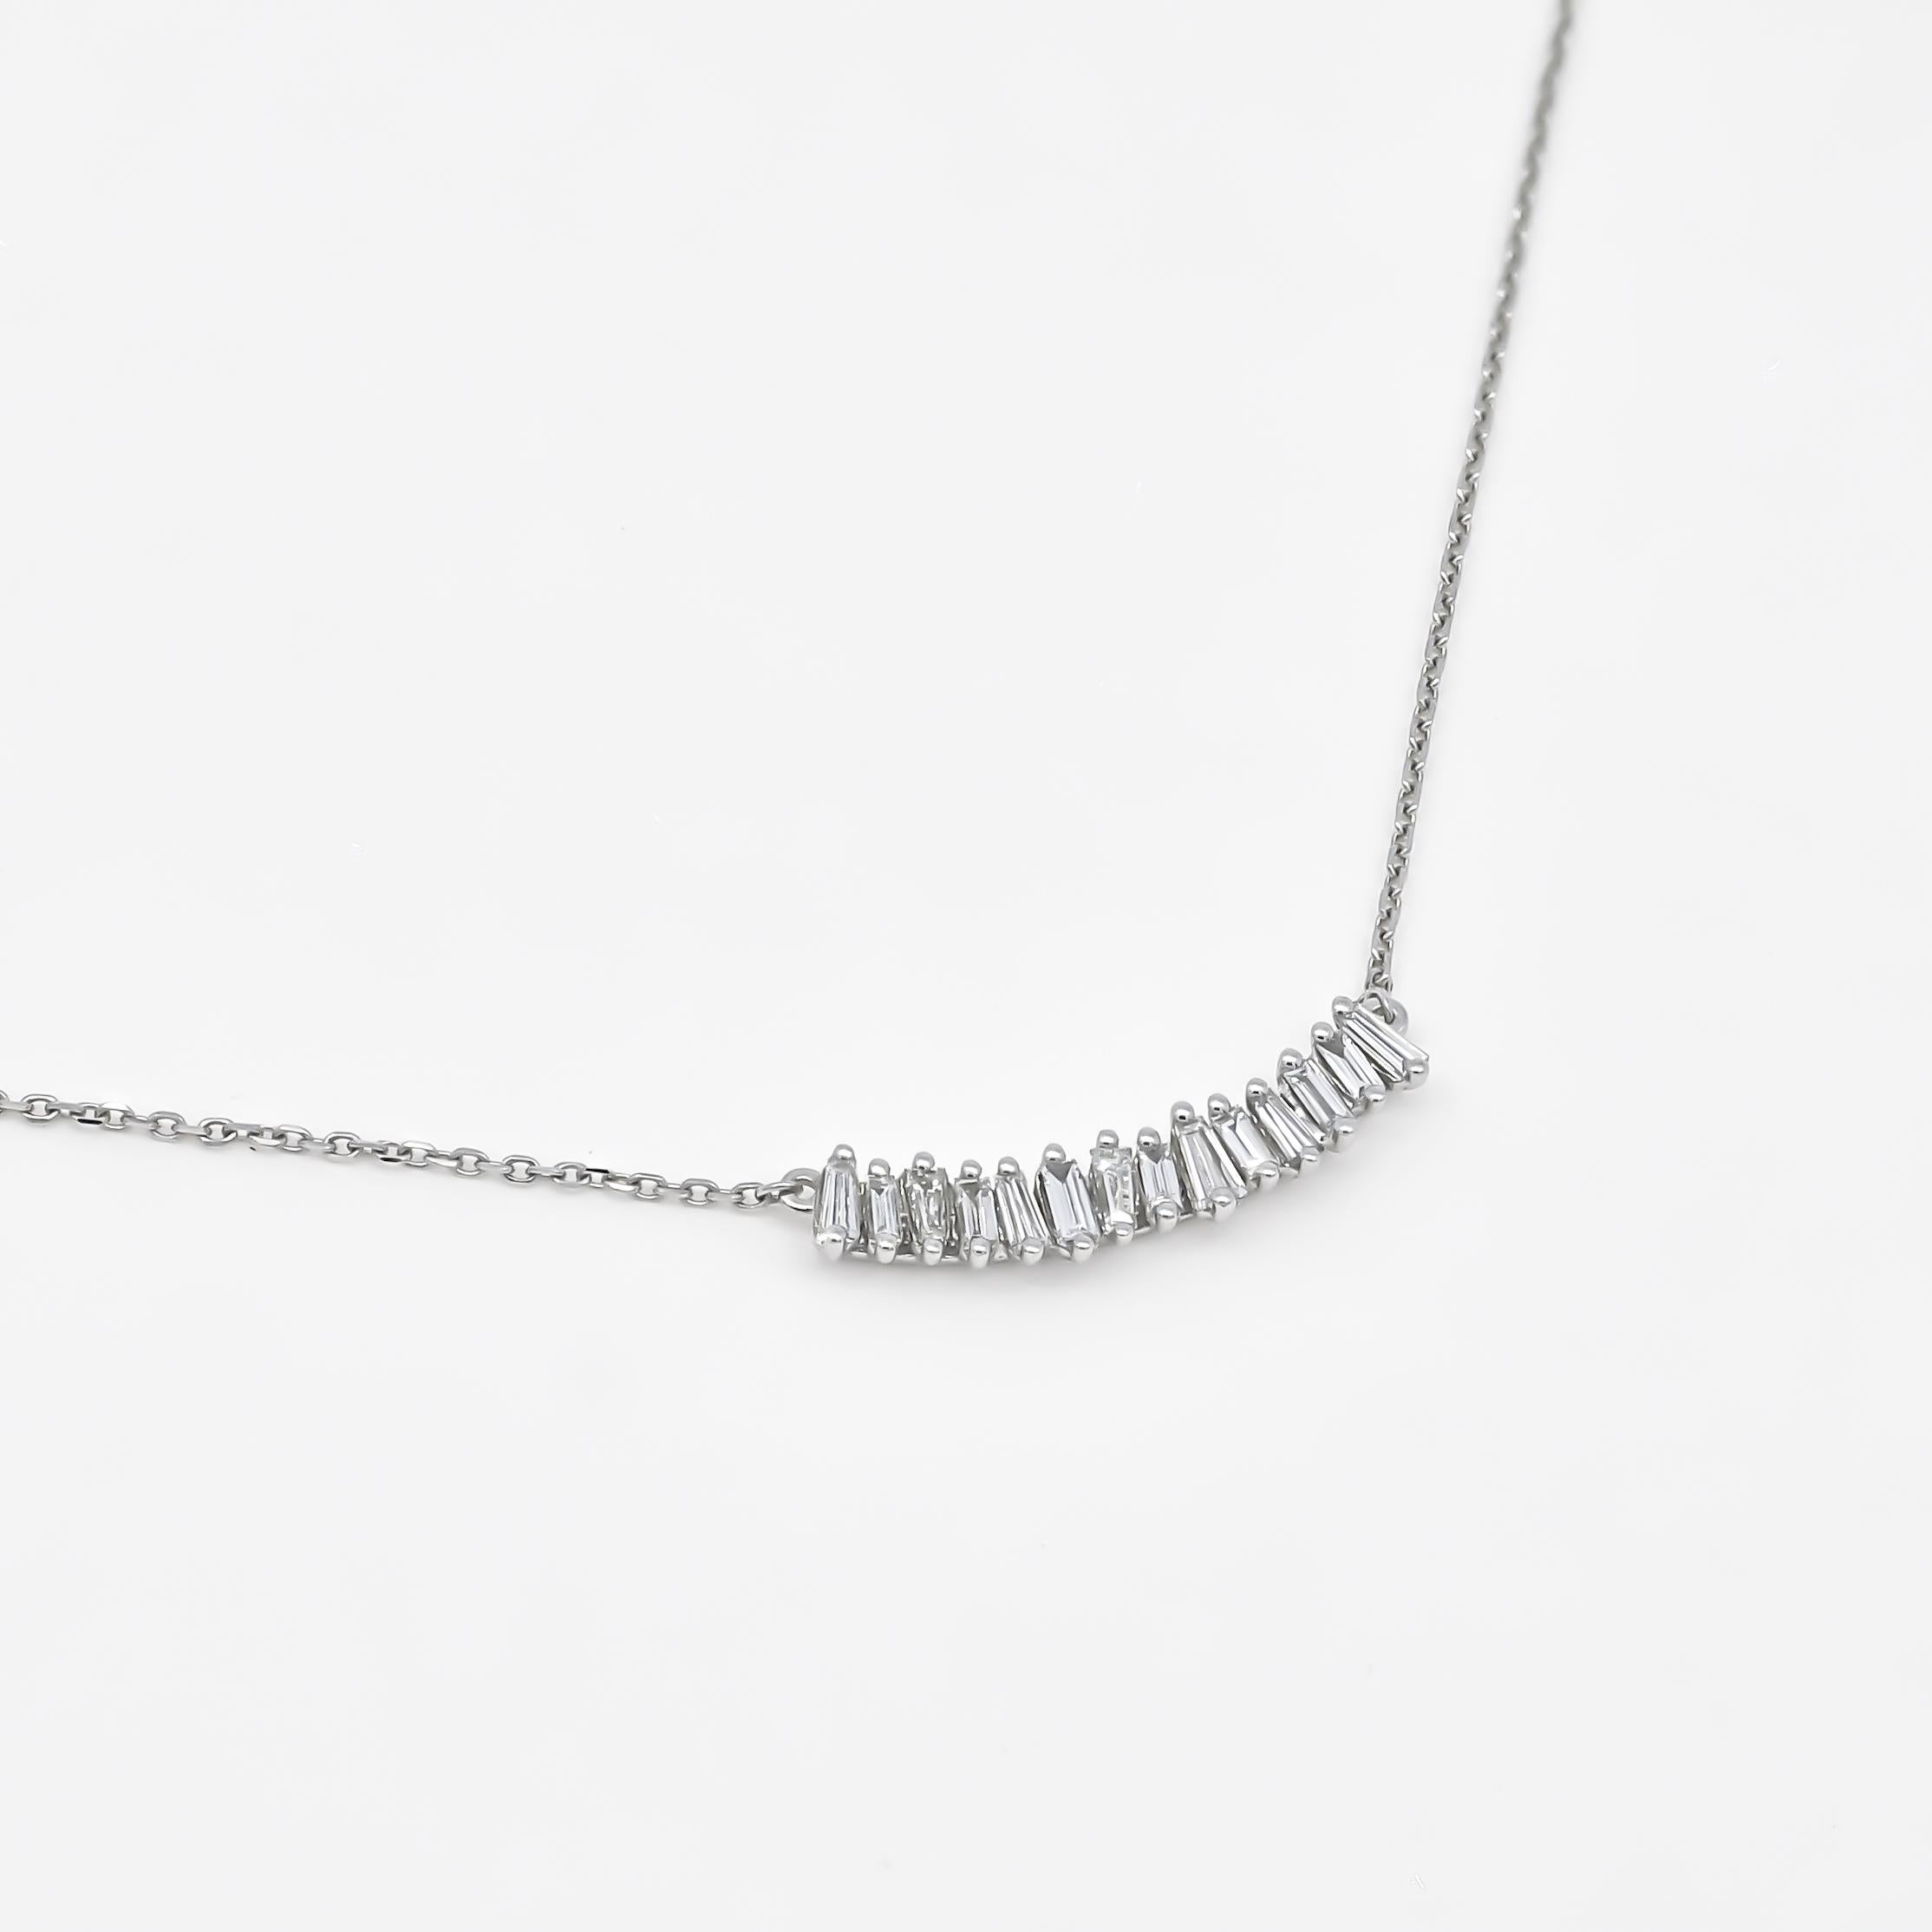 The baguette diamonds in this cluster pendant necklace are expertly cut and meticulously arranged to create a harmonious balance of shapes and angles. The elongated rectangular shape of the baguette diamonds adds a touch of modernity and